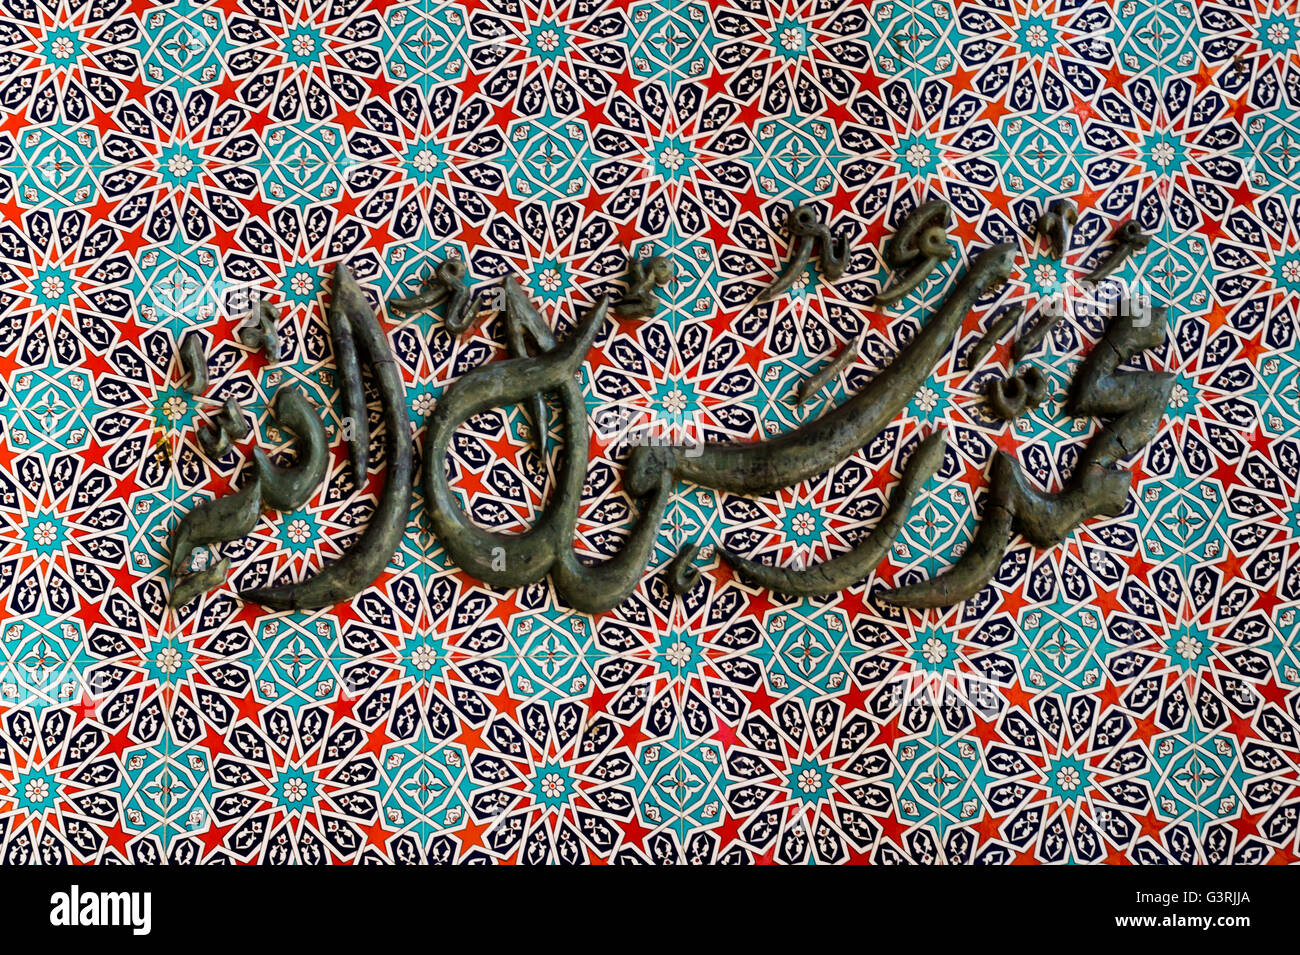 Mosque Decoration Arabic calligraphy on Red Texture Pattern Background Stock Photo